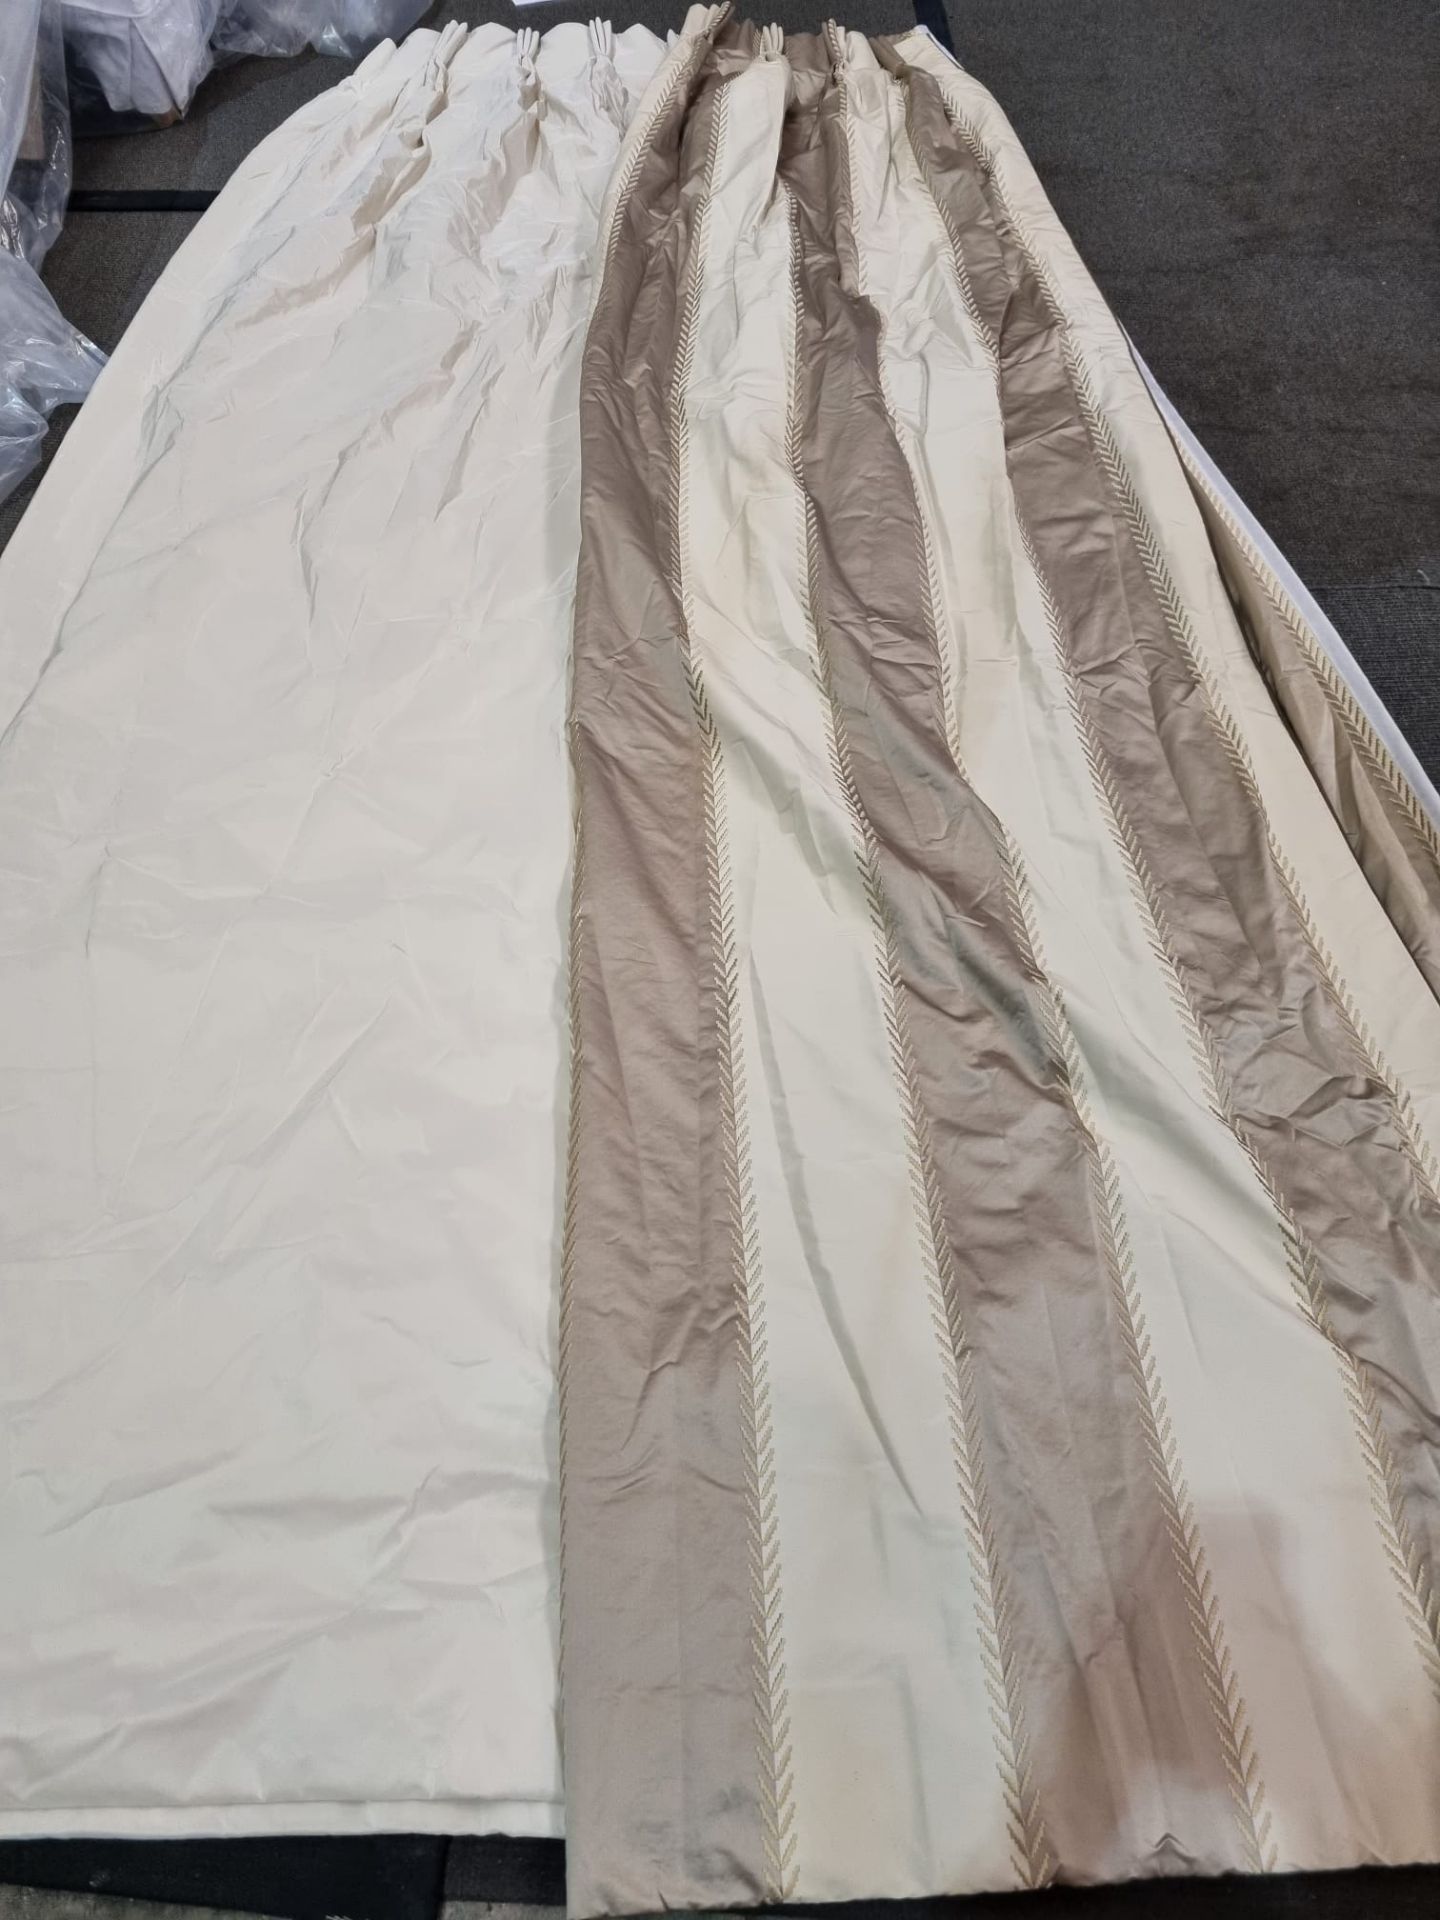 A Pair Of Cream Silk Drapes With Patterned Brown Jabots Striped Edge Trim 260 x 270cm (Dorch 43) - Image 4 of 4